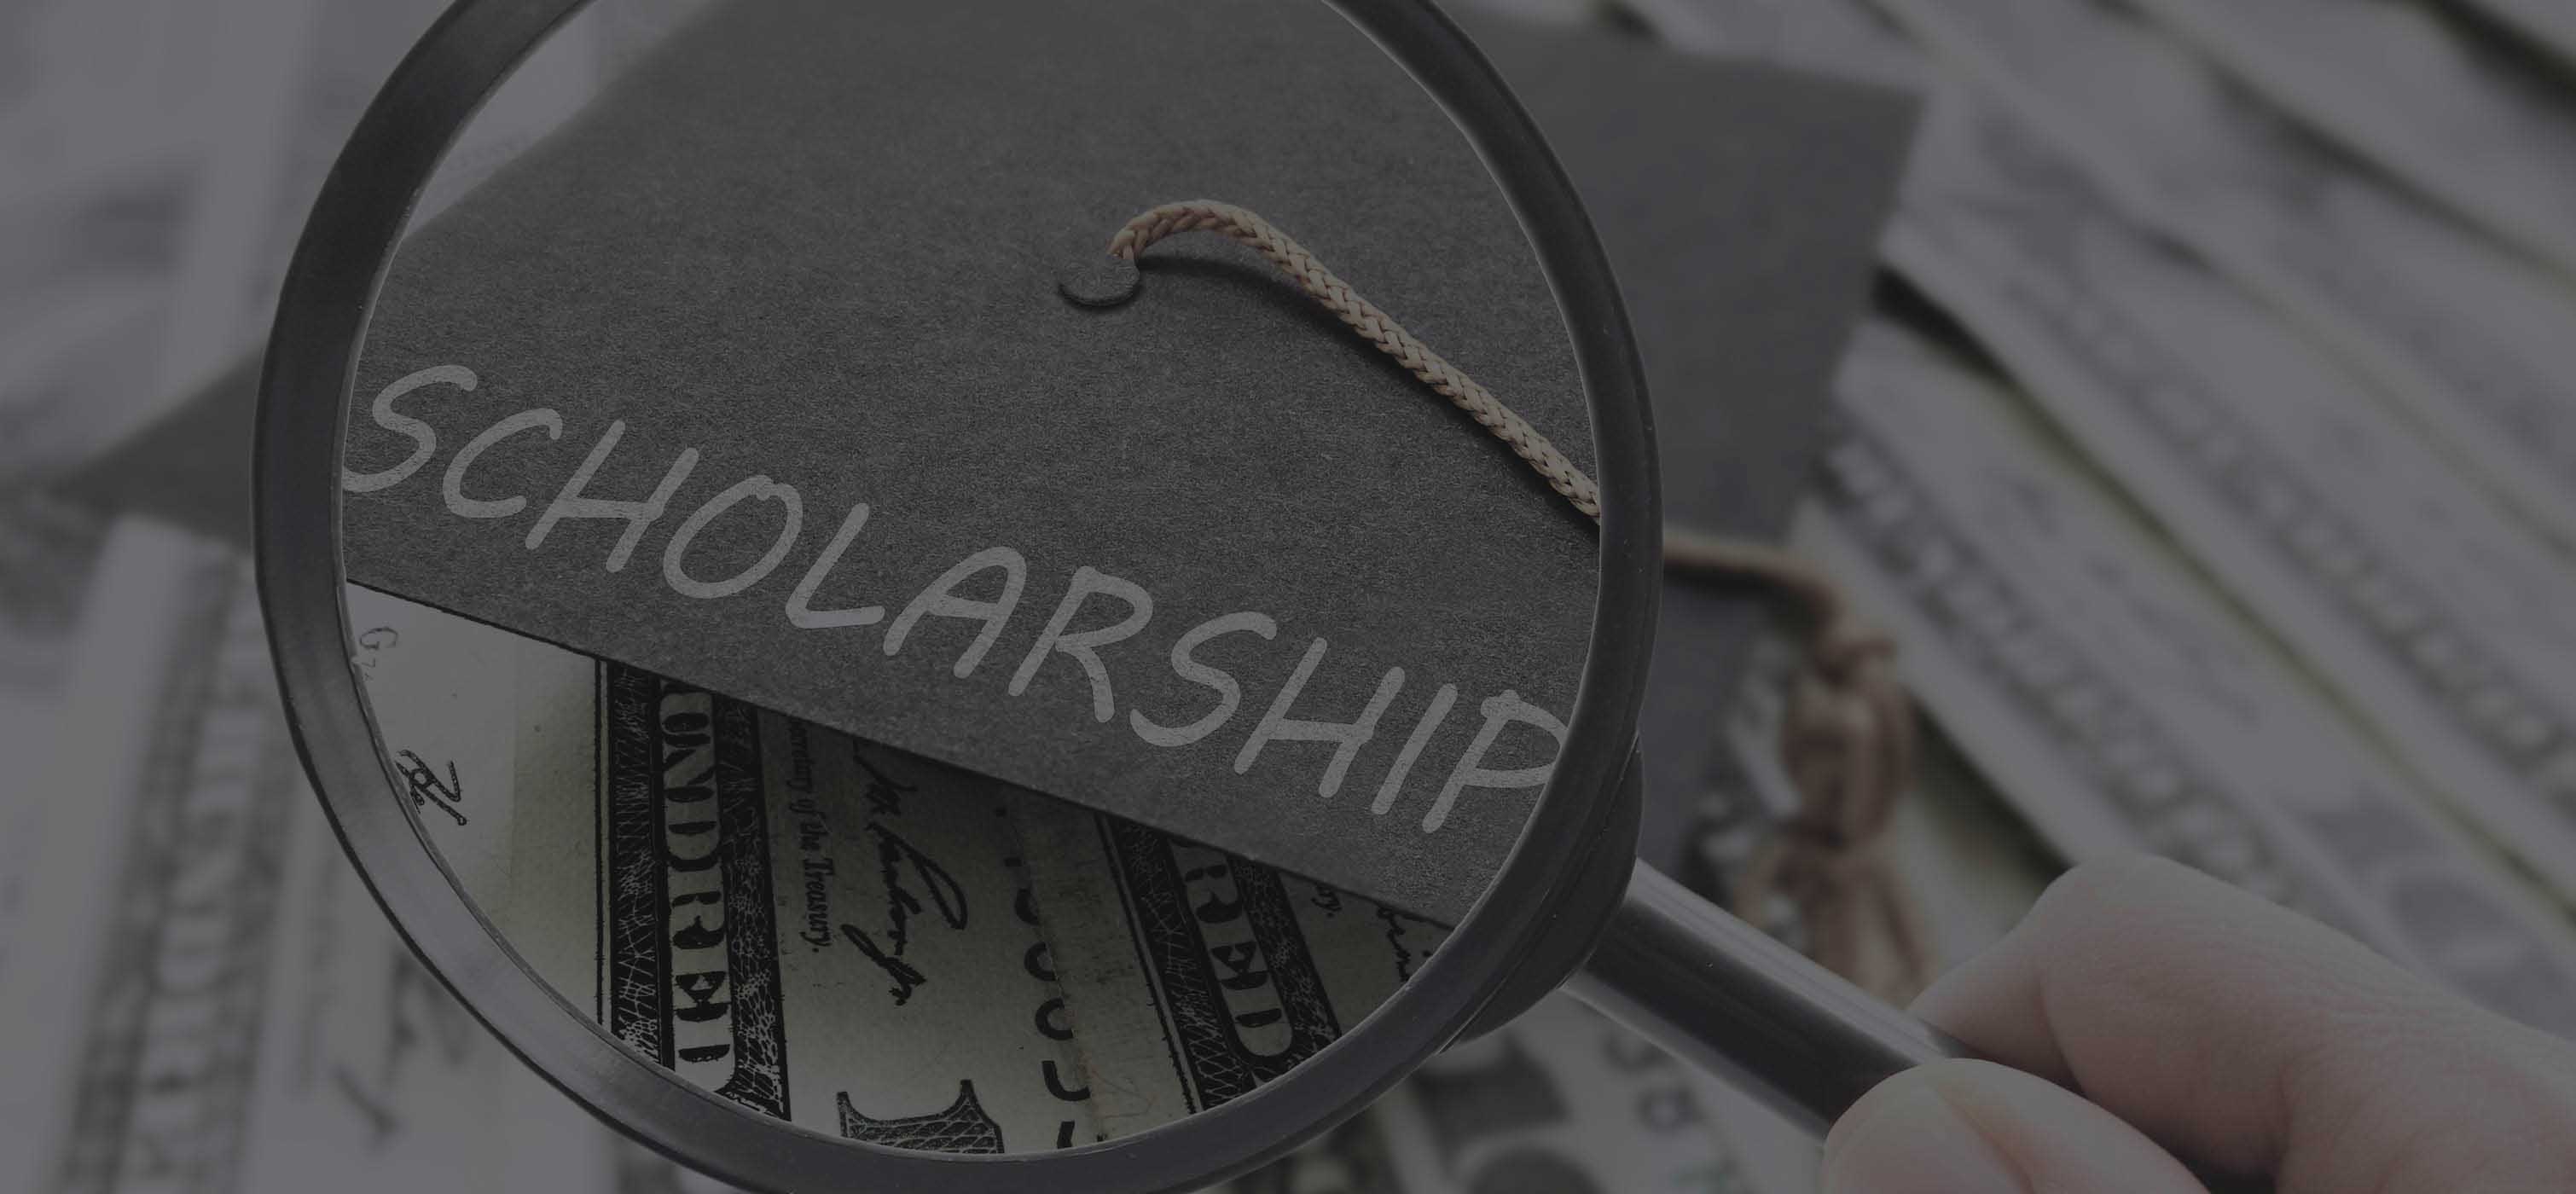 Magnifying glass over a graduation cap that says "scholarship" money in the background